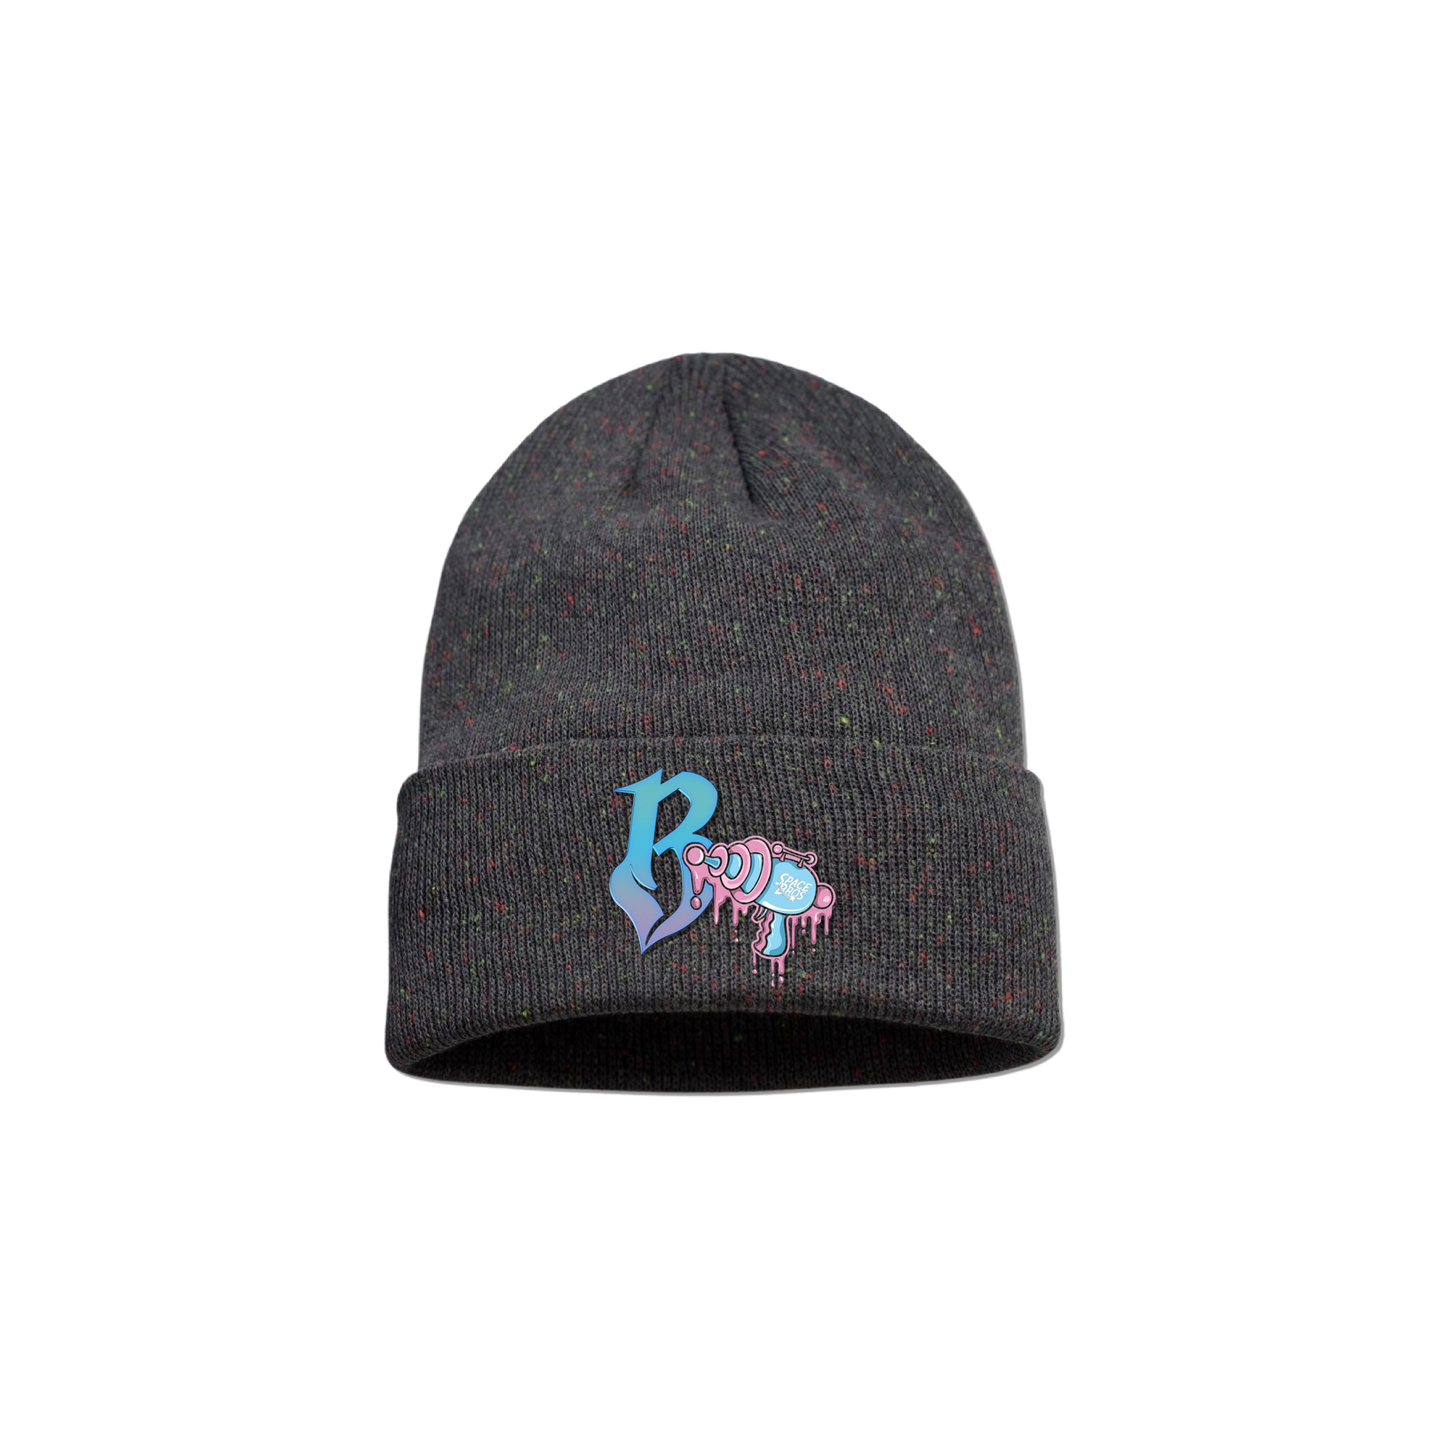 BAKA NOTNICE X SPACE BROS EMBROIDERED FINE KNIT BEANIE (GREY SPECKLE)